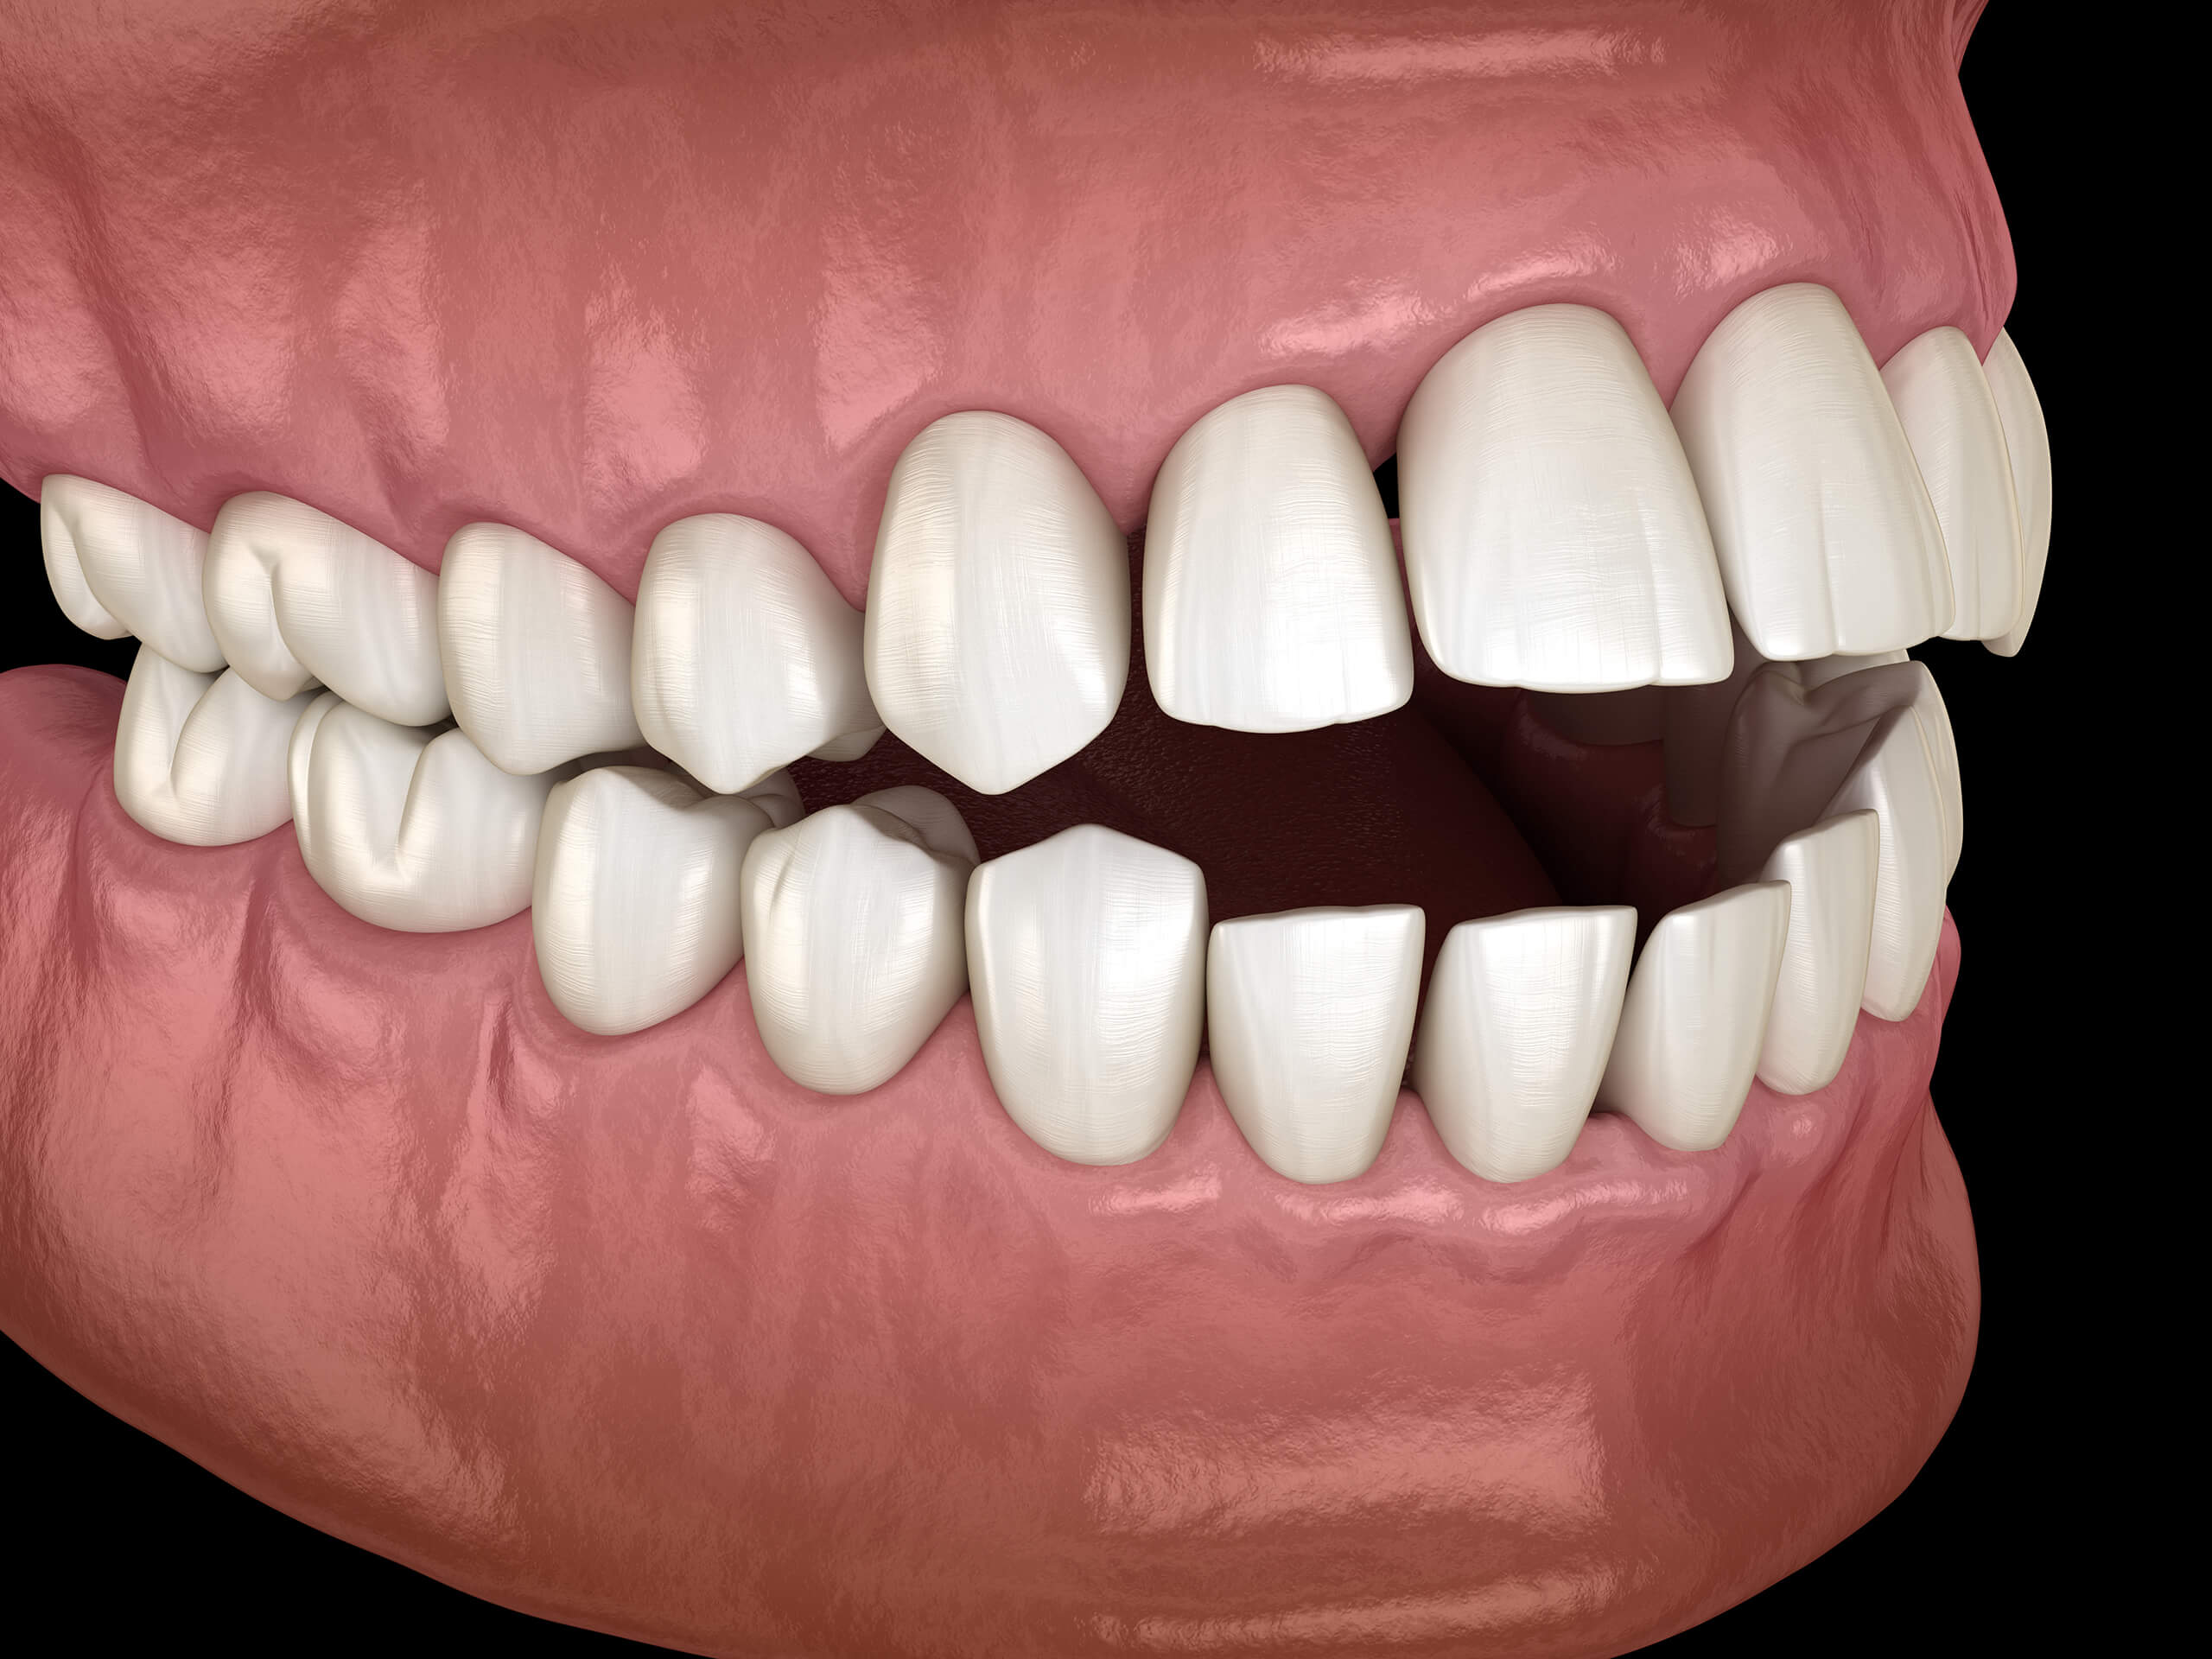 Model of a mouth with an open bite